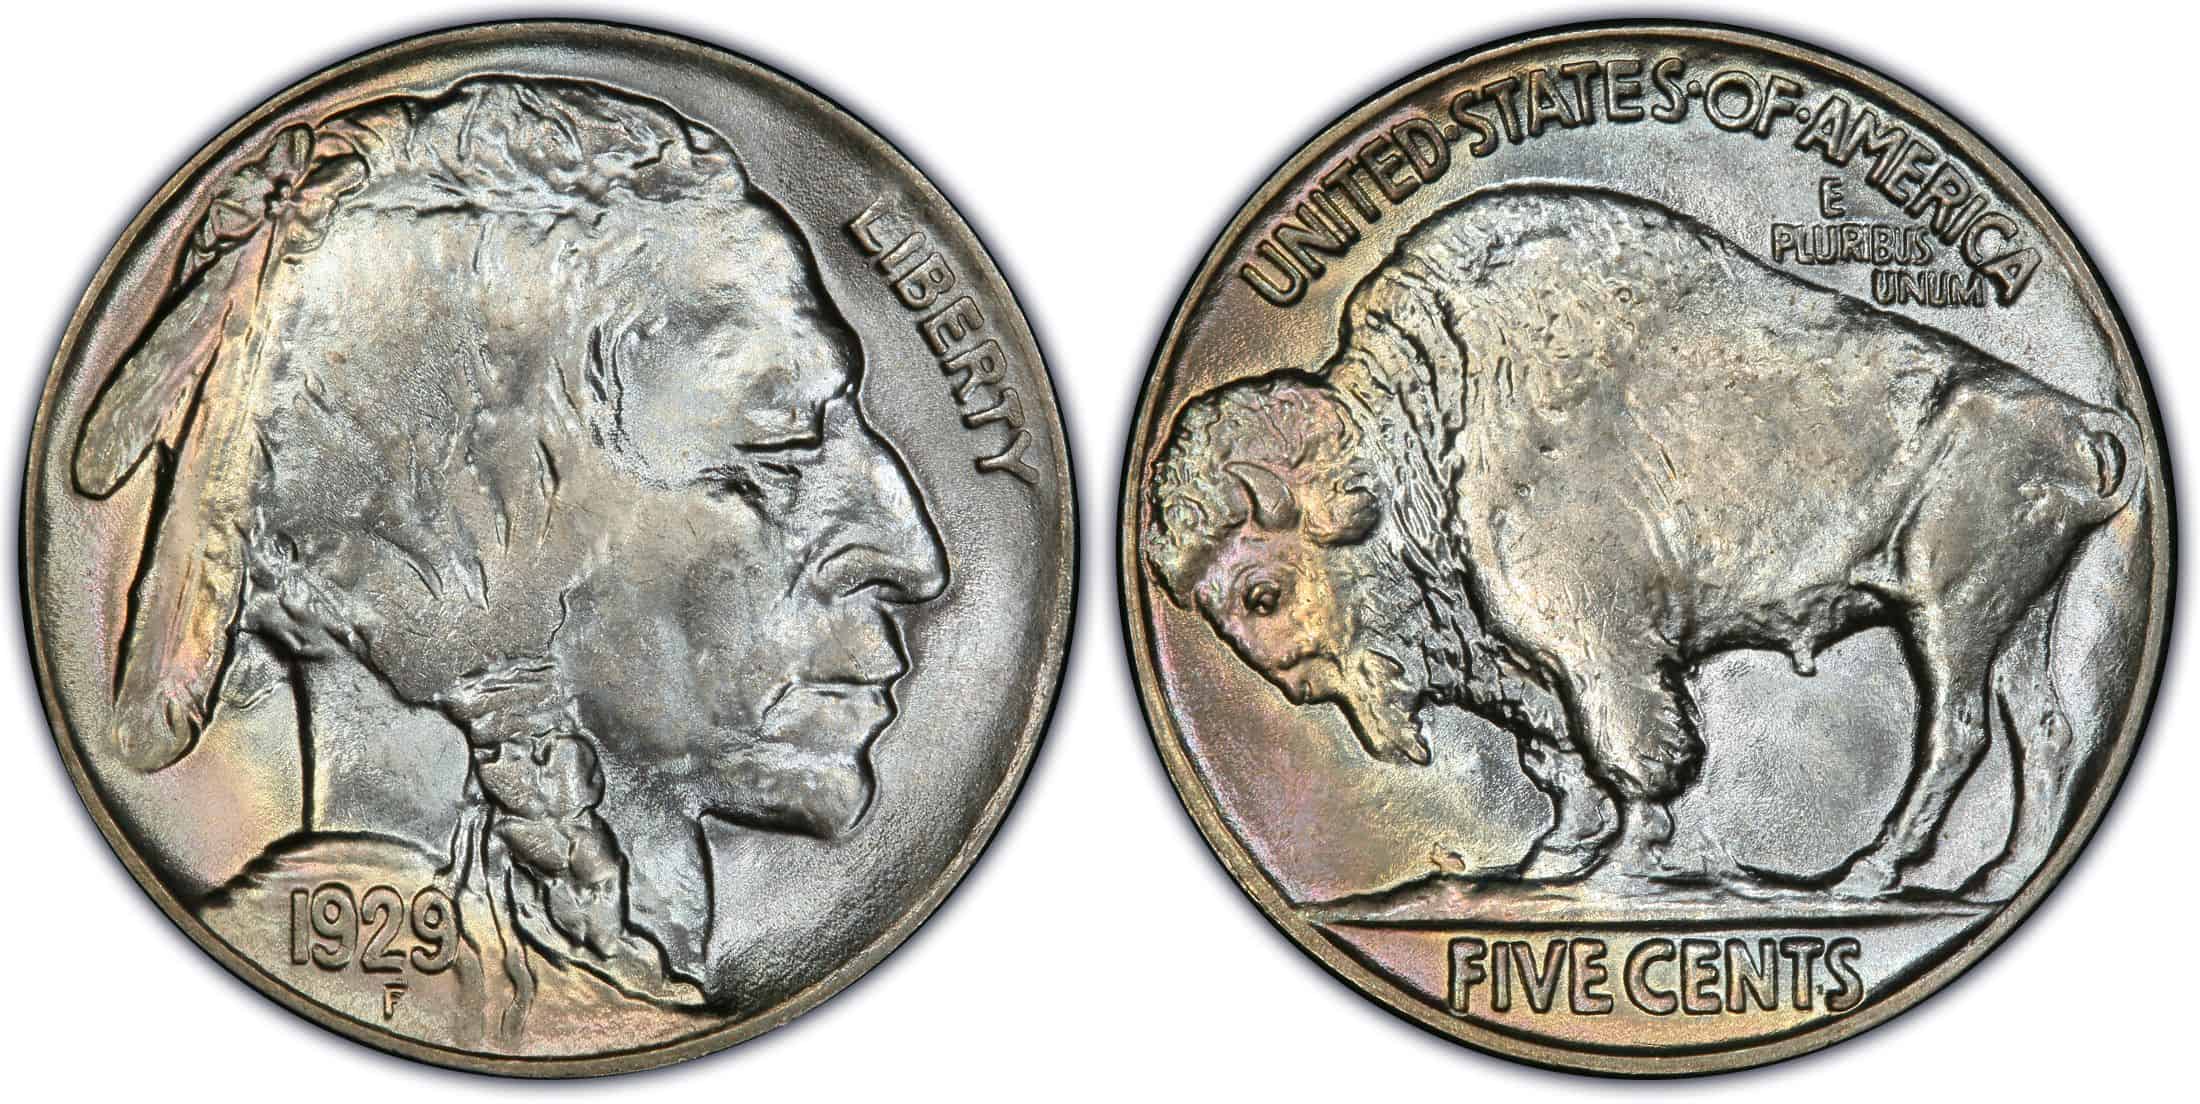 1929 Buffalo nickel without a mint mark